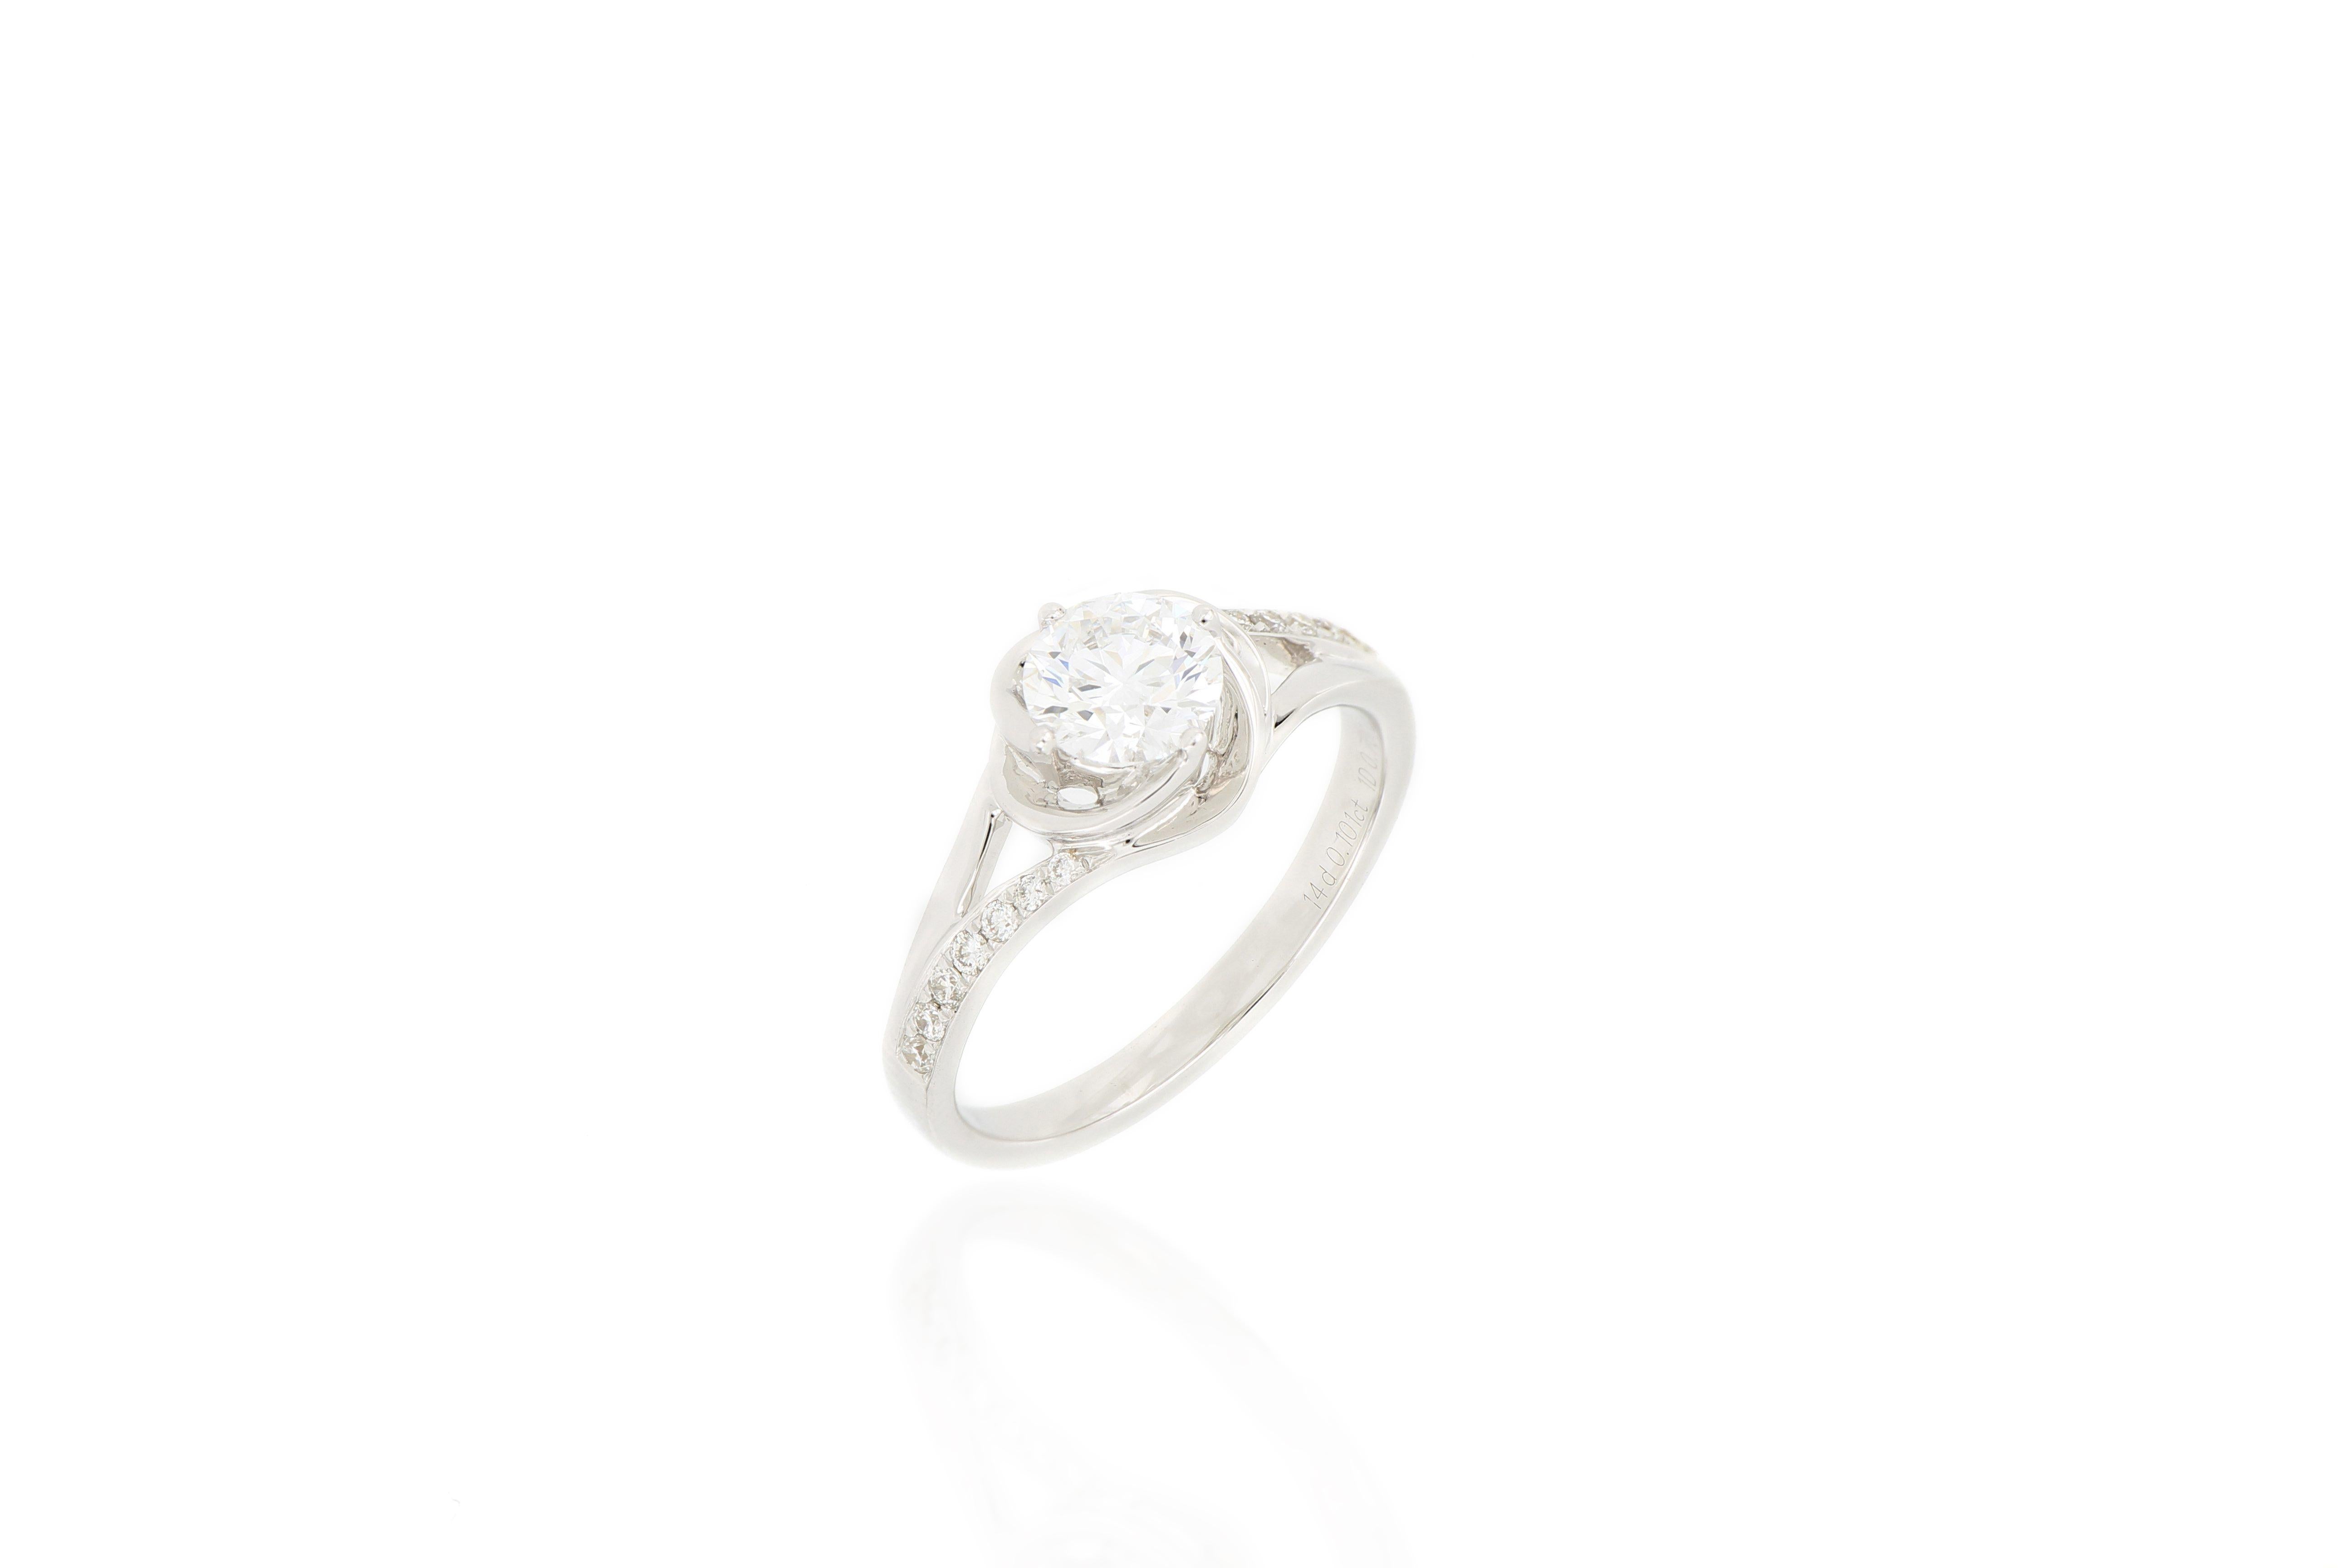 A stylish ring, set with a brilliant-cut diamond of D colour, weighing 0.70  carats, and small diamonds on the shoulder, totaling 0.10carats , mounted in 18 Karat white gold.  A very beautiful ring which can be worn for any occasion.
Accompanied by